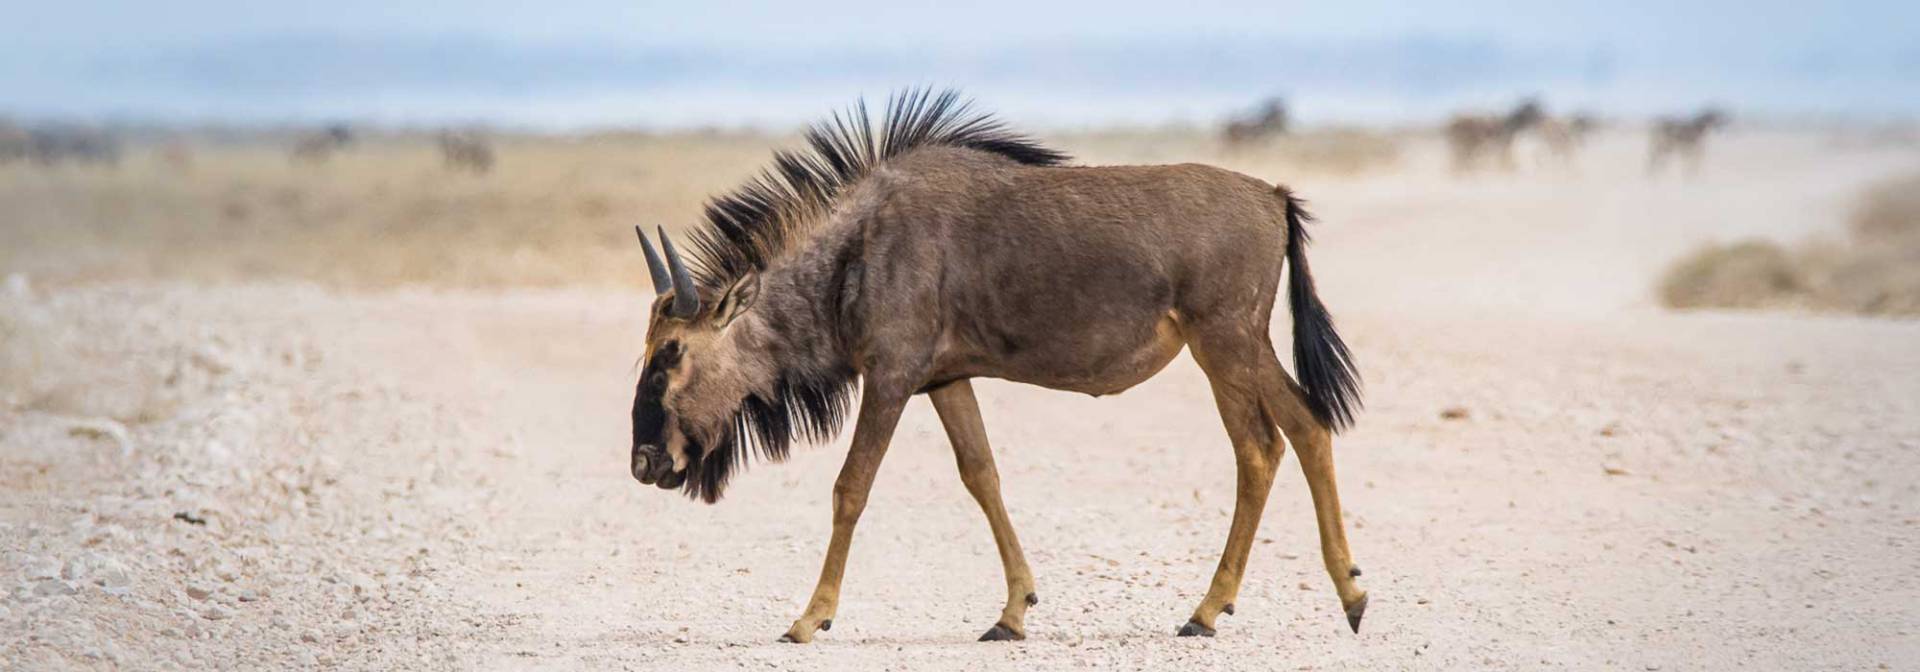 Young Wildbeest in Etosha National Park